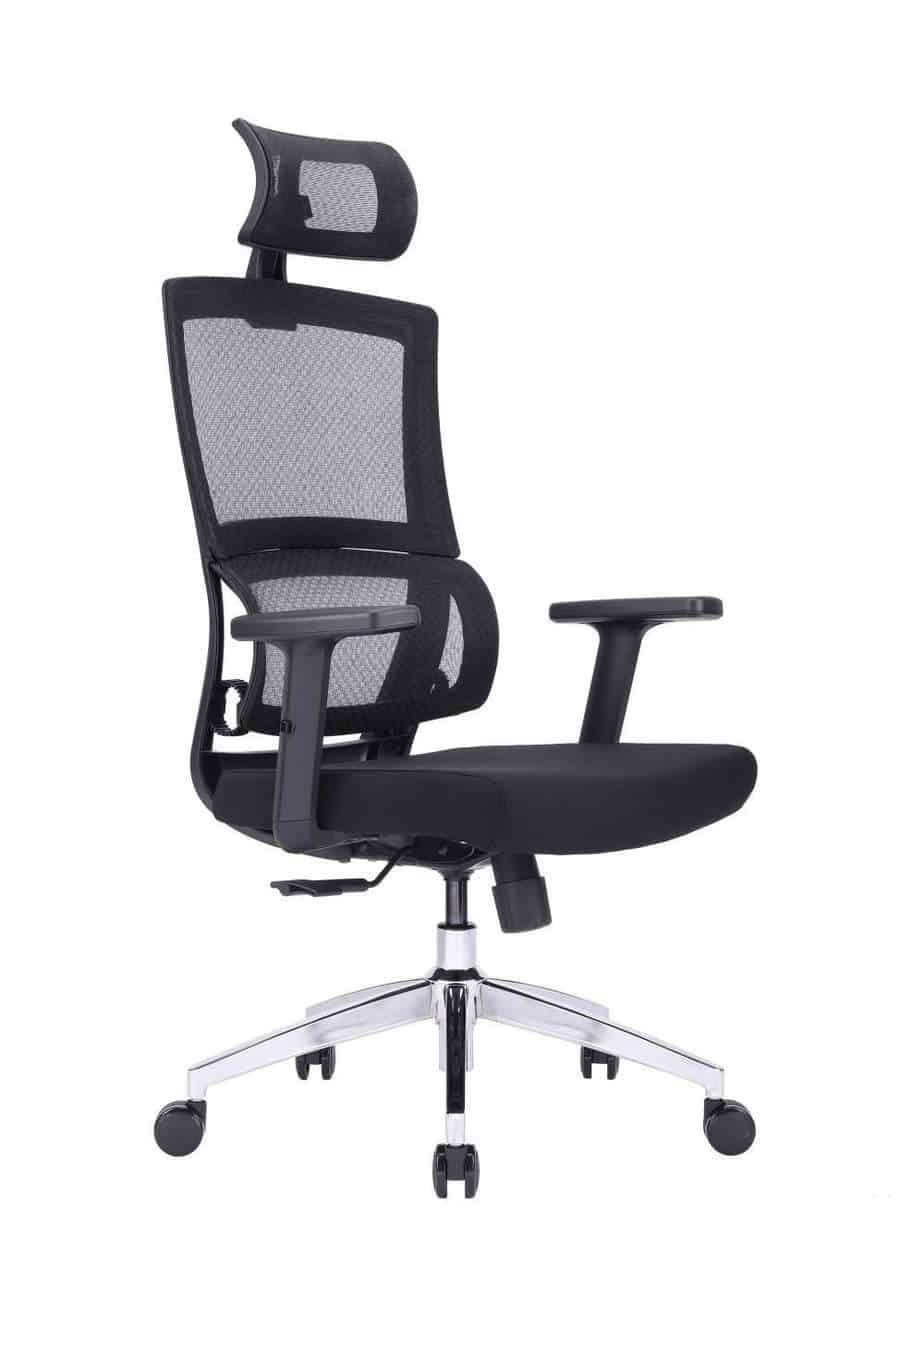 Ultimate Executive™ Mid-Back Ergonomic Office Chair 2490 - PainFree Living:  LIFEFORM® Chairs